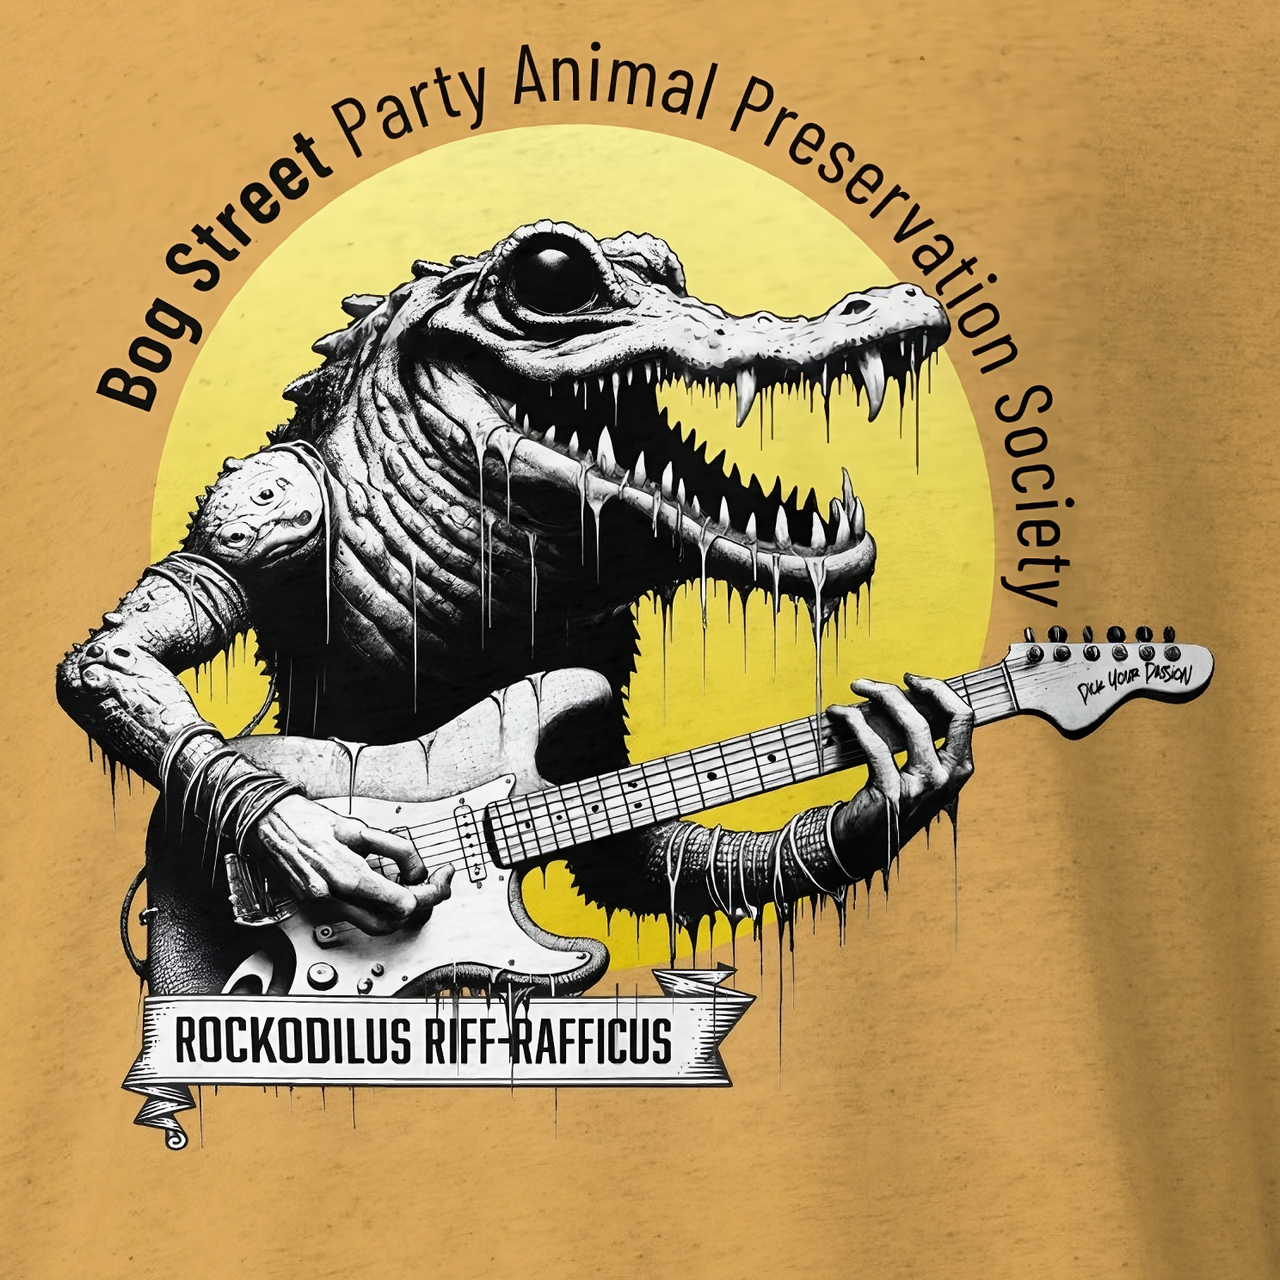 Party Animal Preservation Society [Rust]